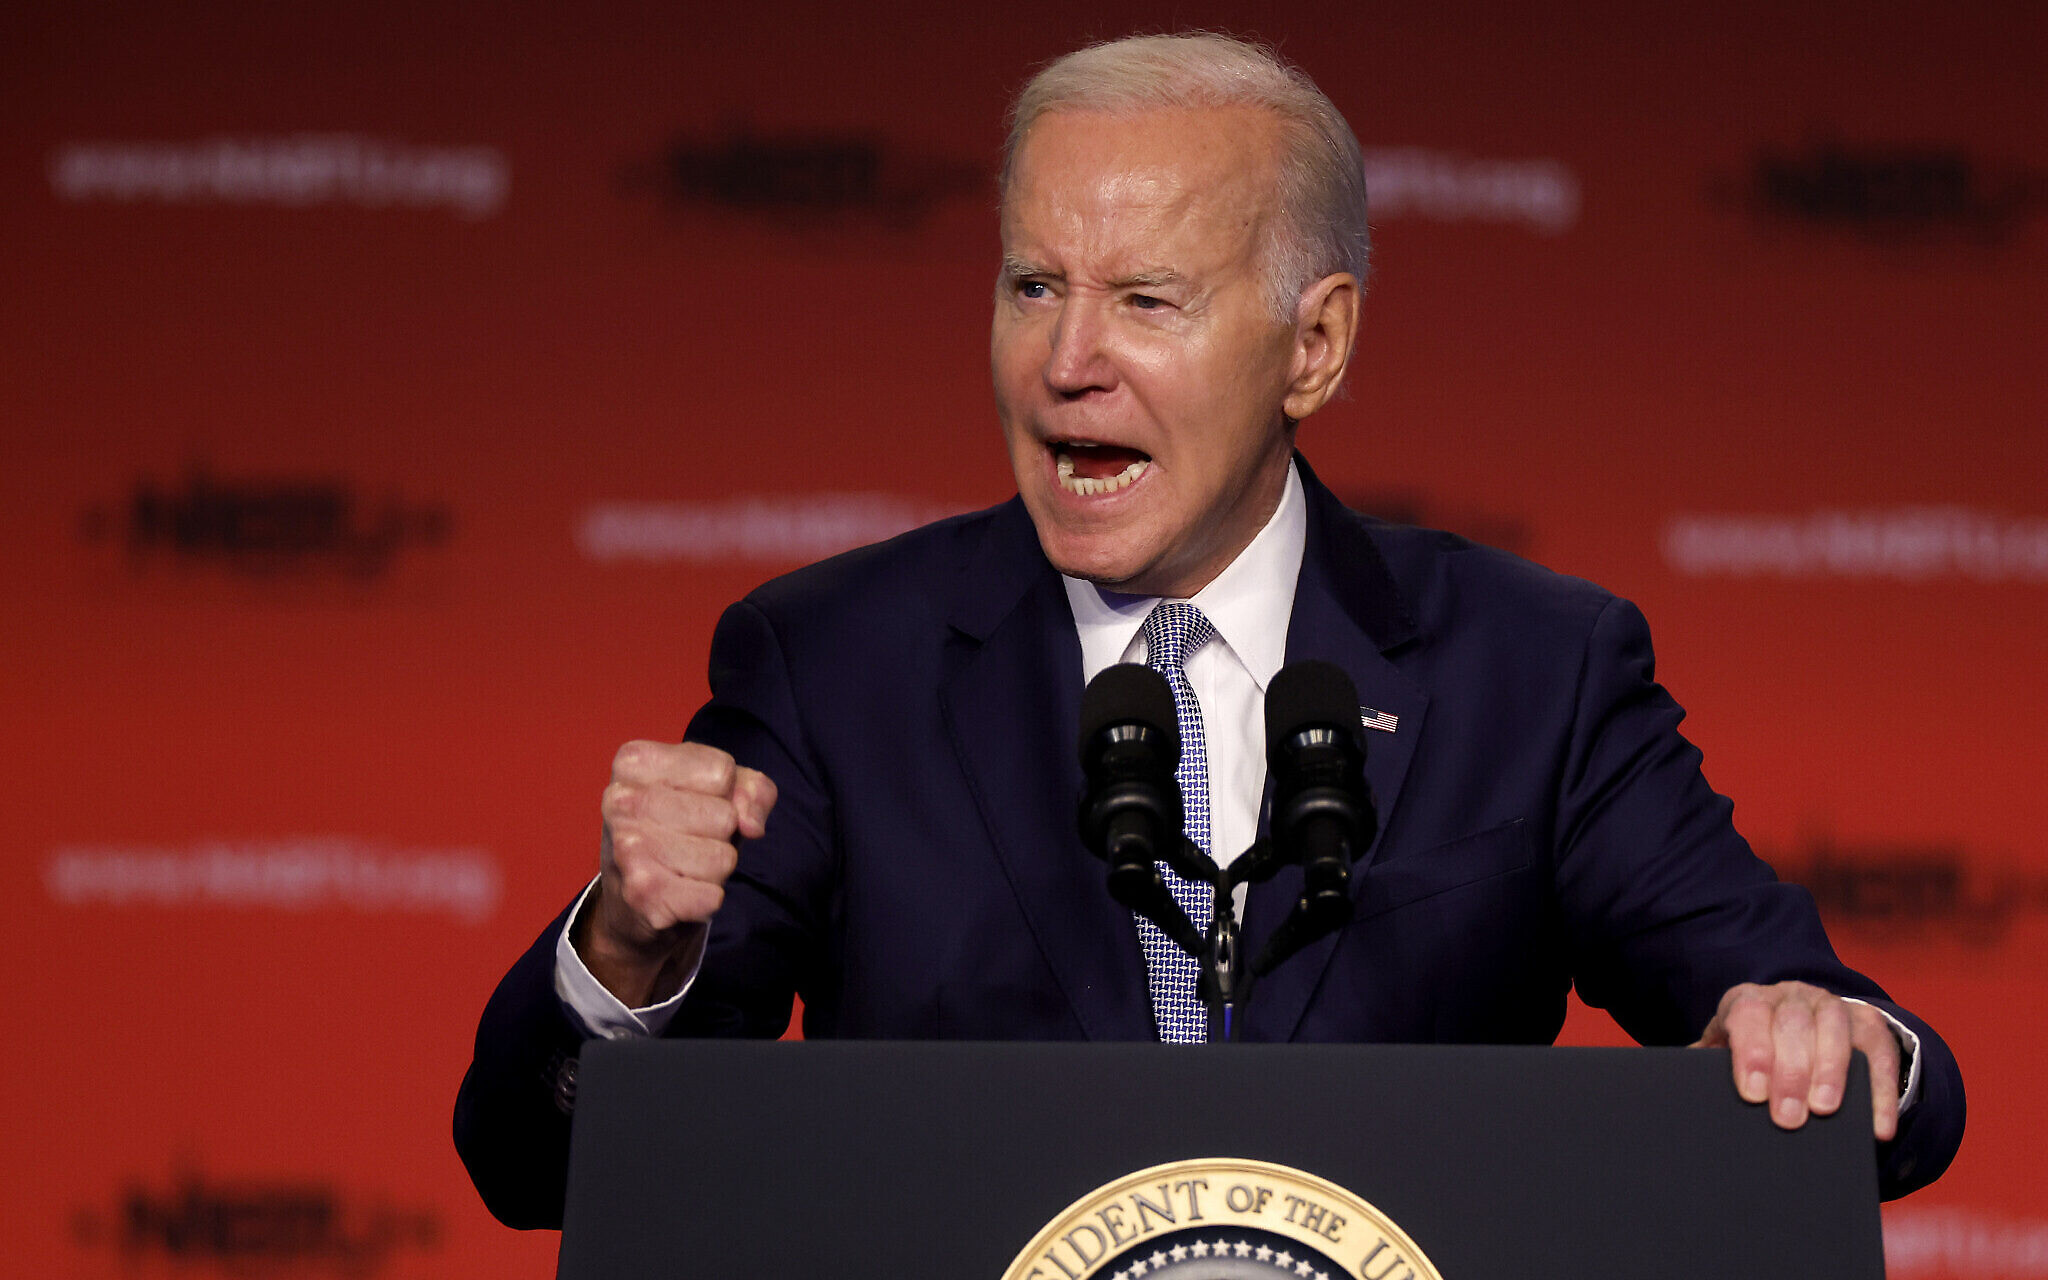 With 2024 announcement, Biden seeks more time to 'heal' America The